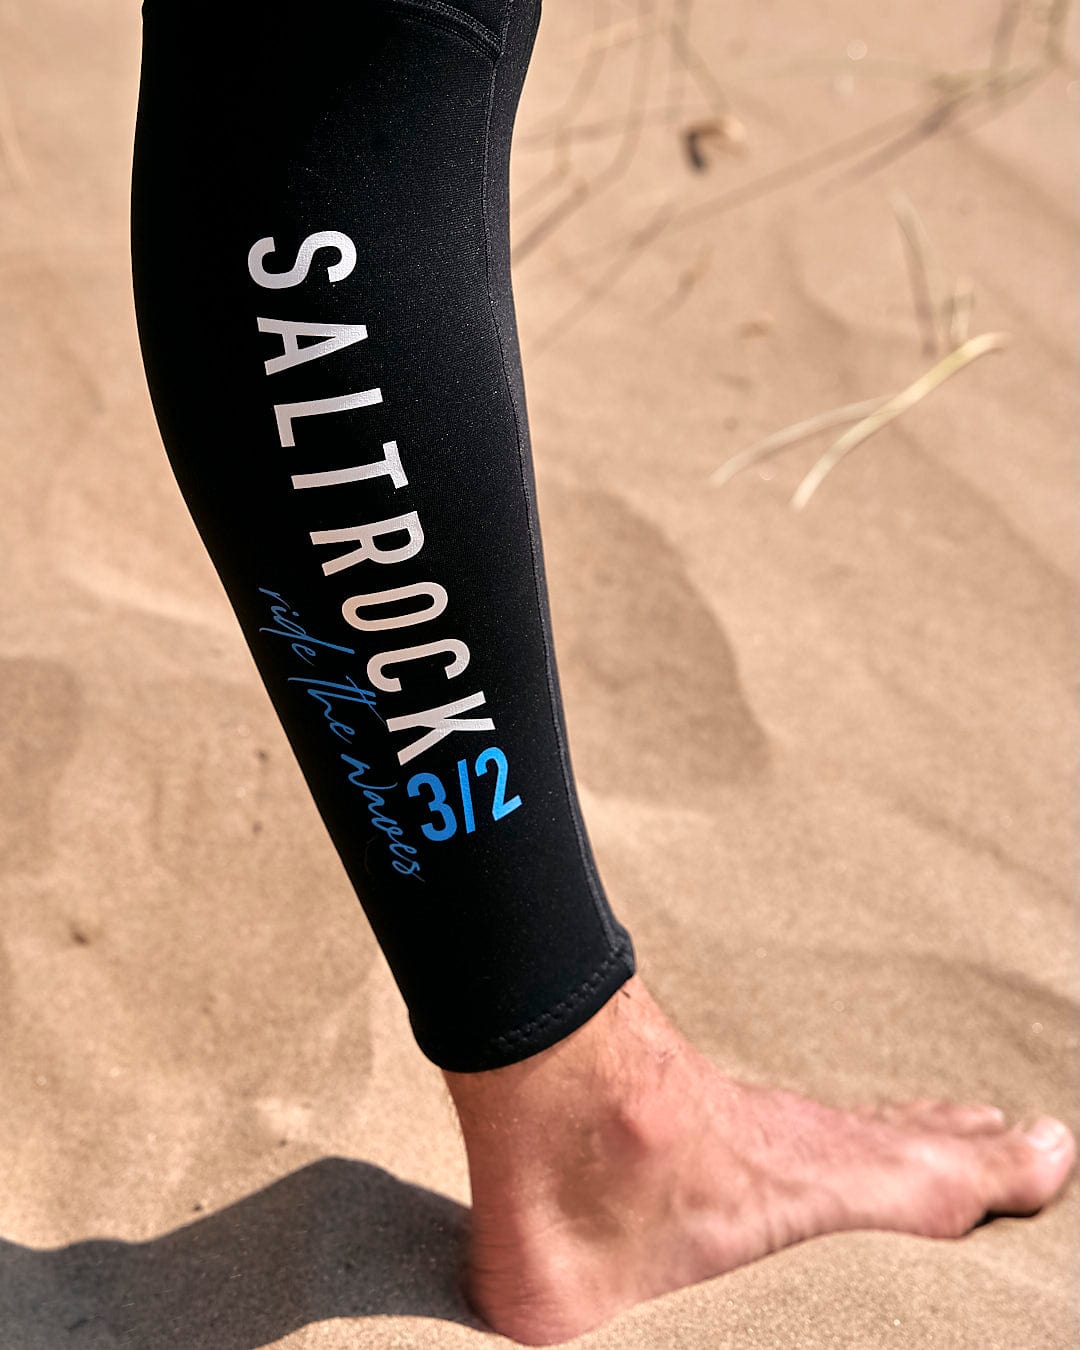 The legs of a person standing in the sand wearing a Saltrock Core - Mens 3/2 Full Wetsuit - Blue/Black.